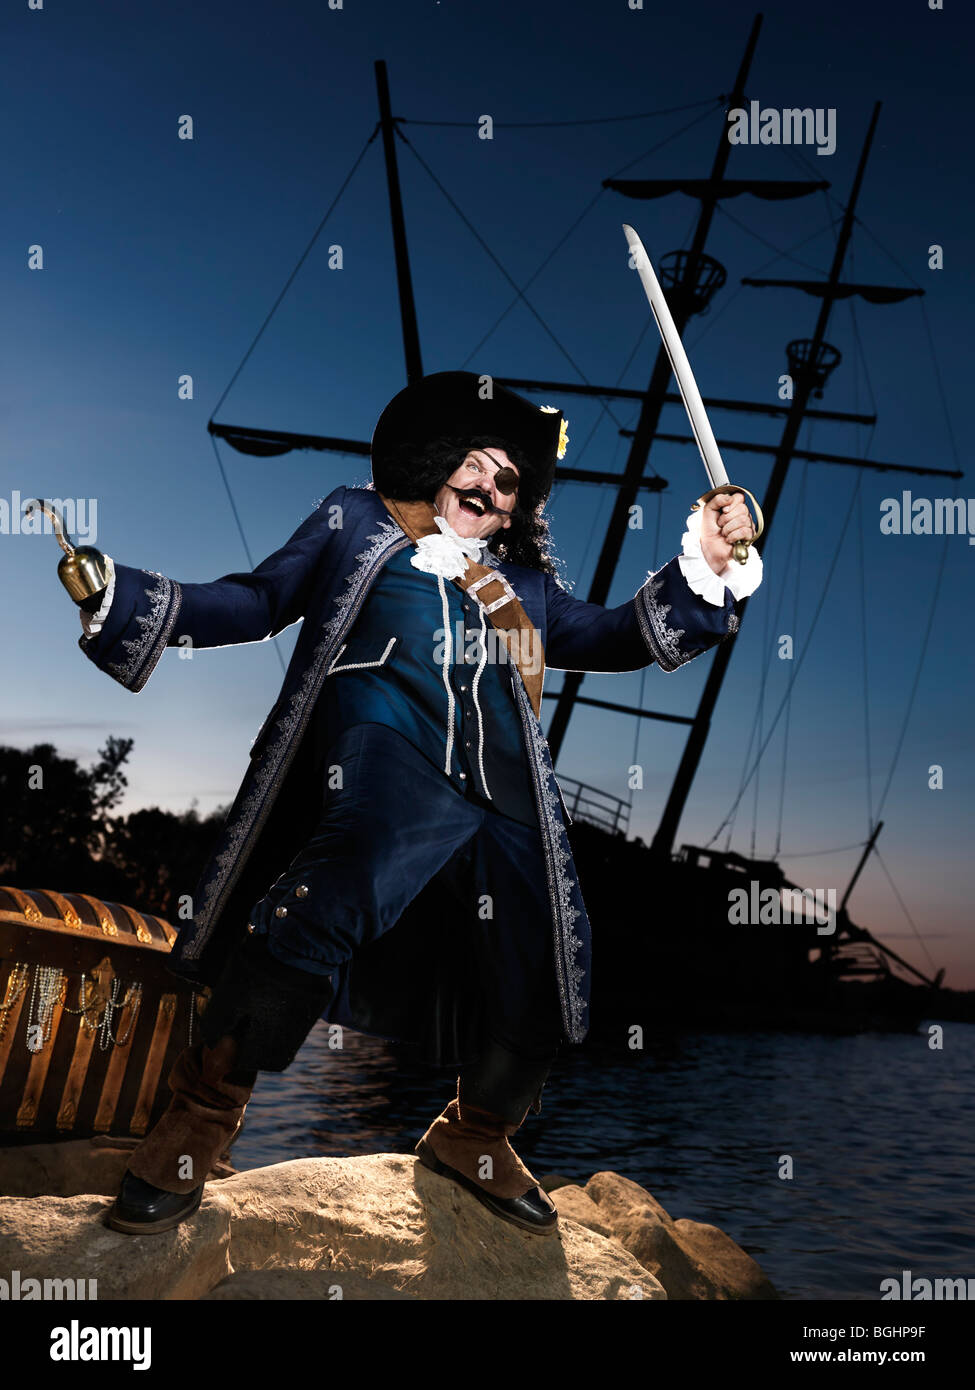 License available at MaximImages.com - Pirate ashore with a treasure chest and a wrecked old ship in the background Stock Photo